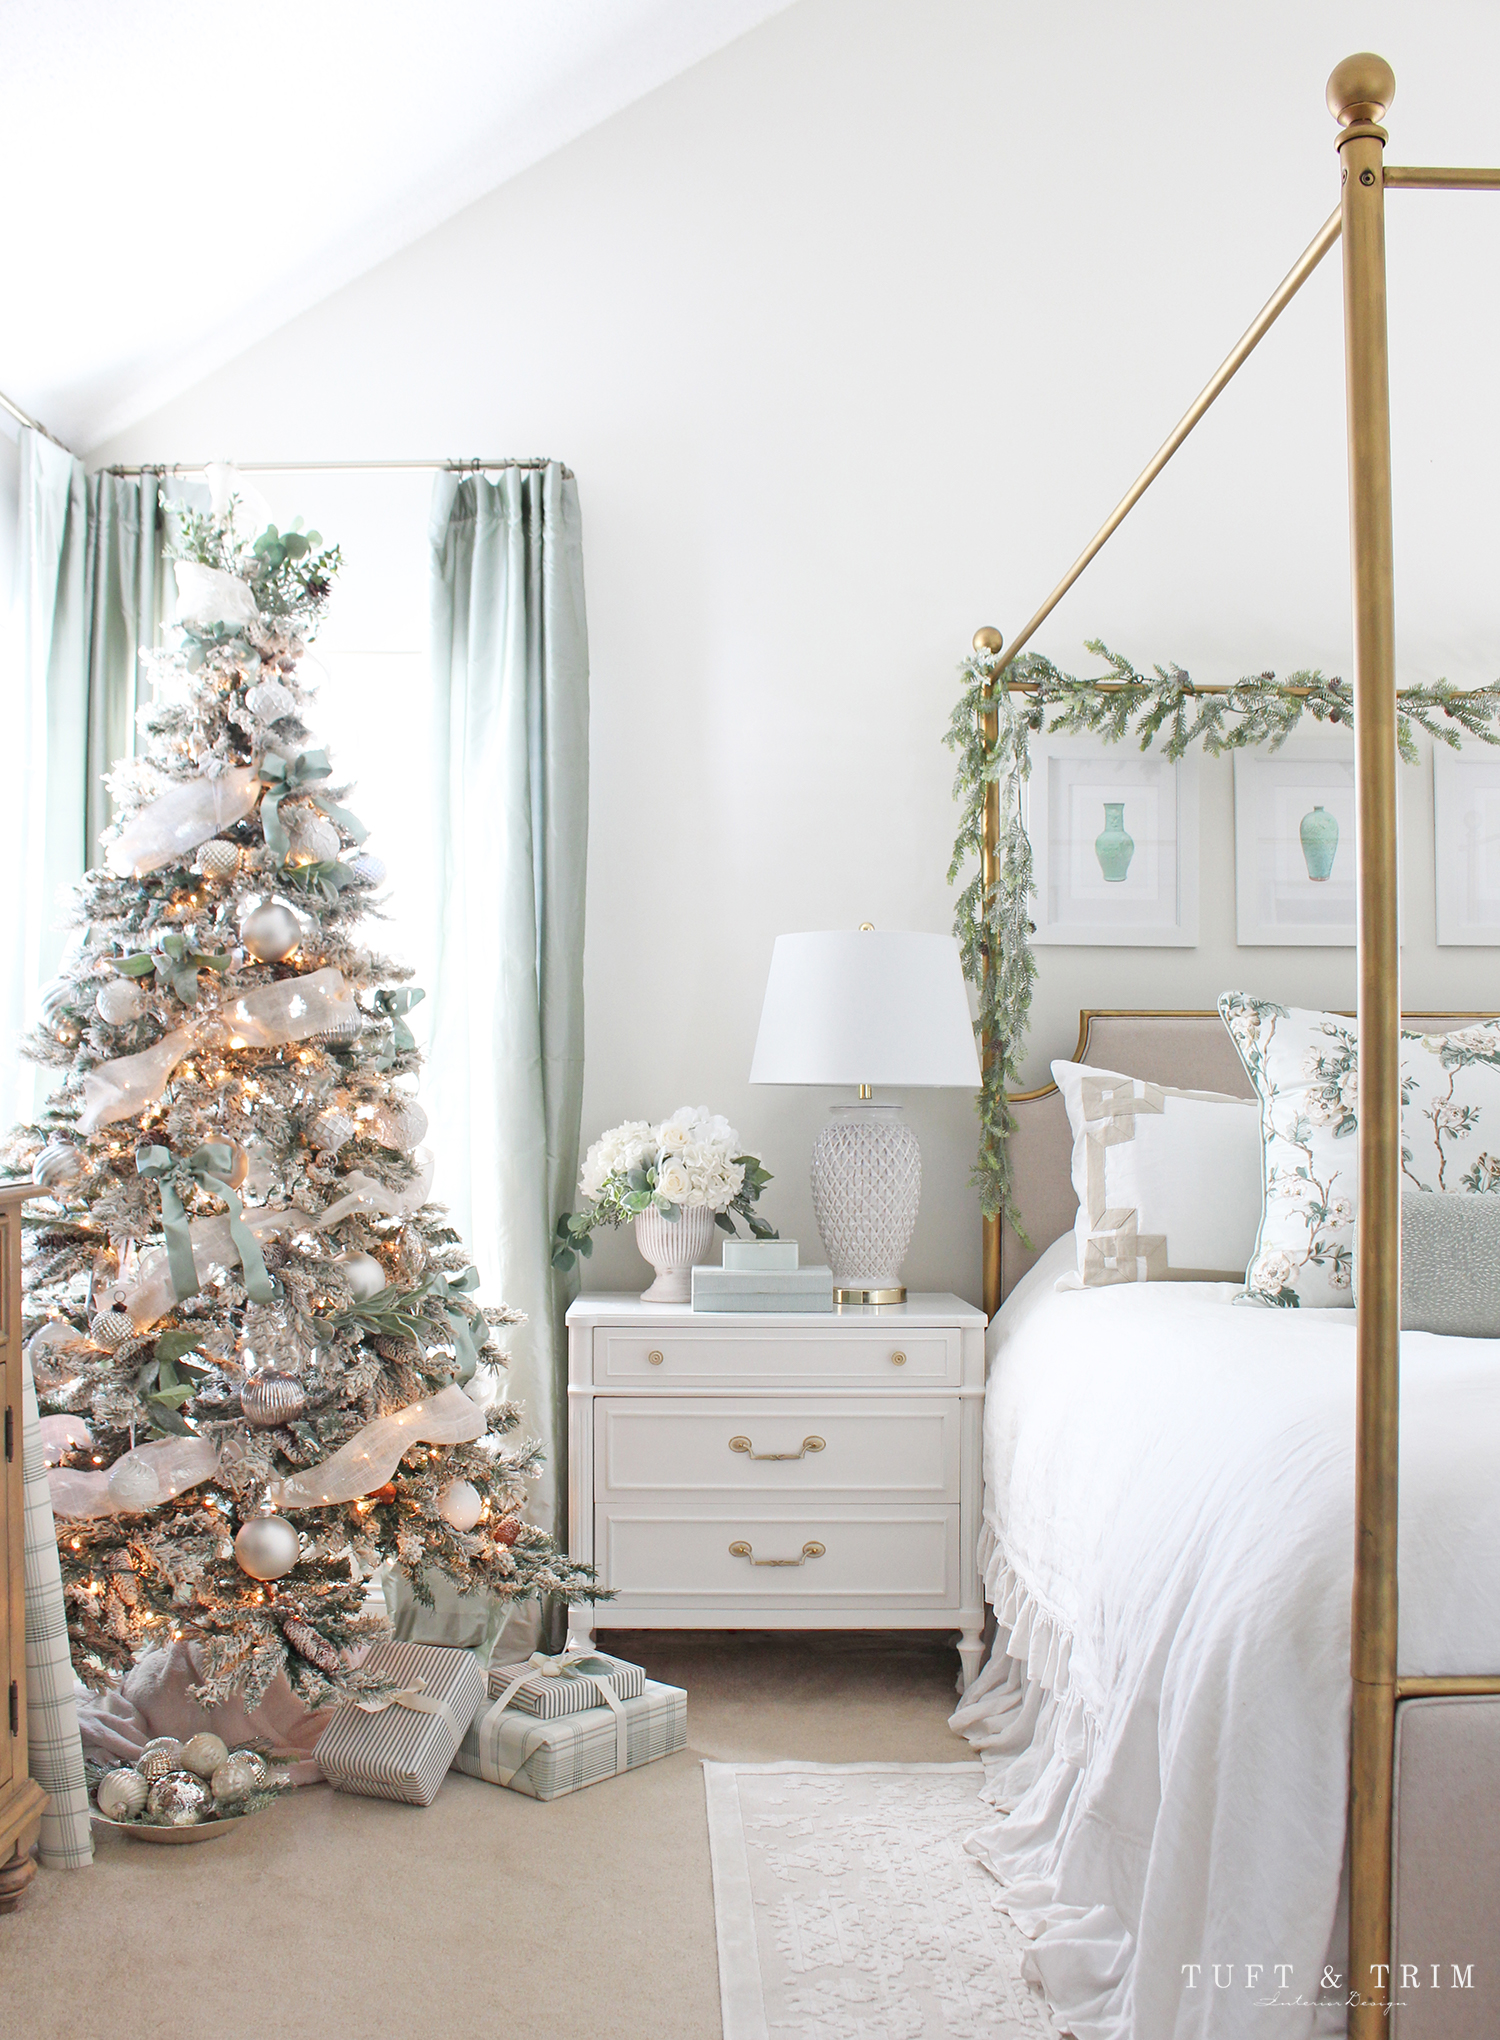 Classic & Chic Holiday Bedroom